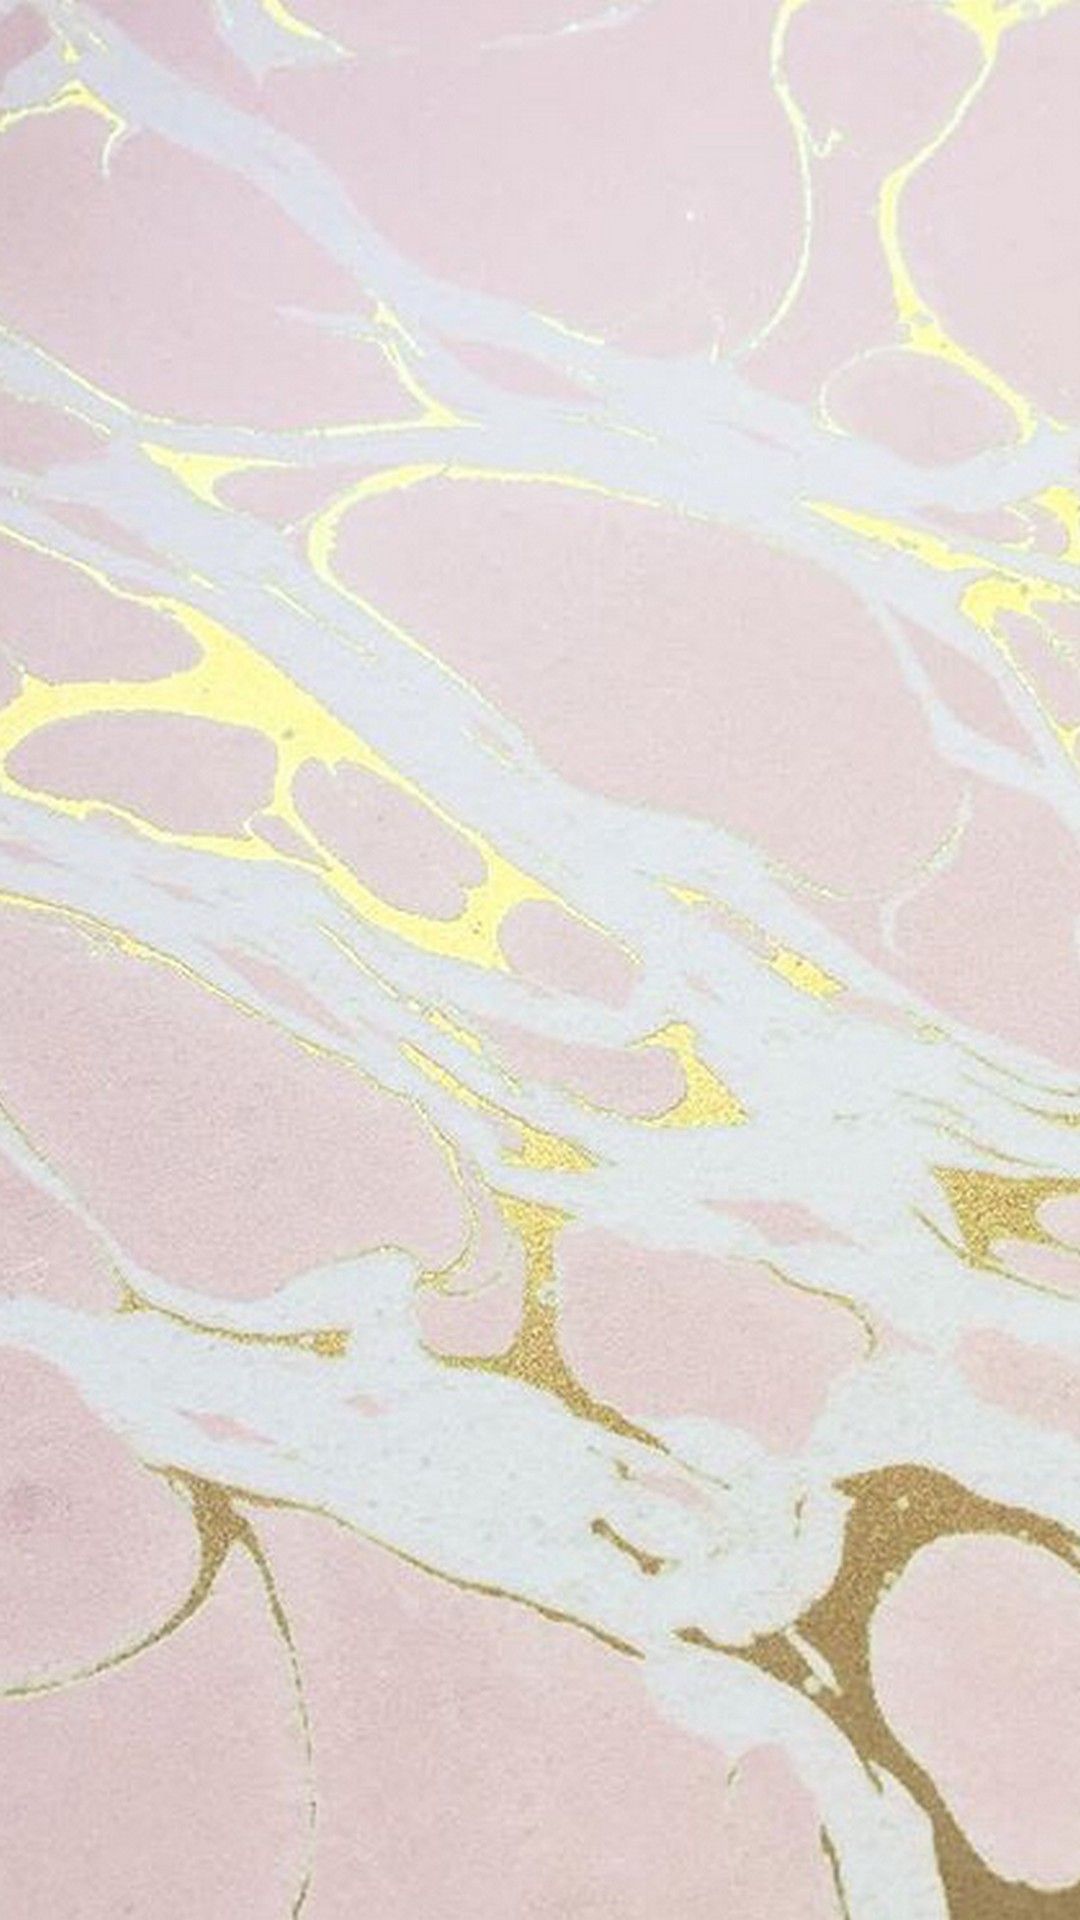 IPhone wallpaper with abstract design of pink and gold colors. - Rose gold, gold, marble